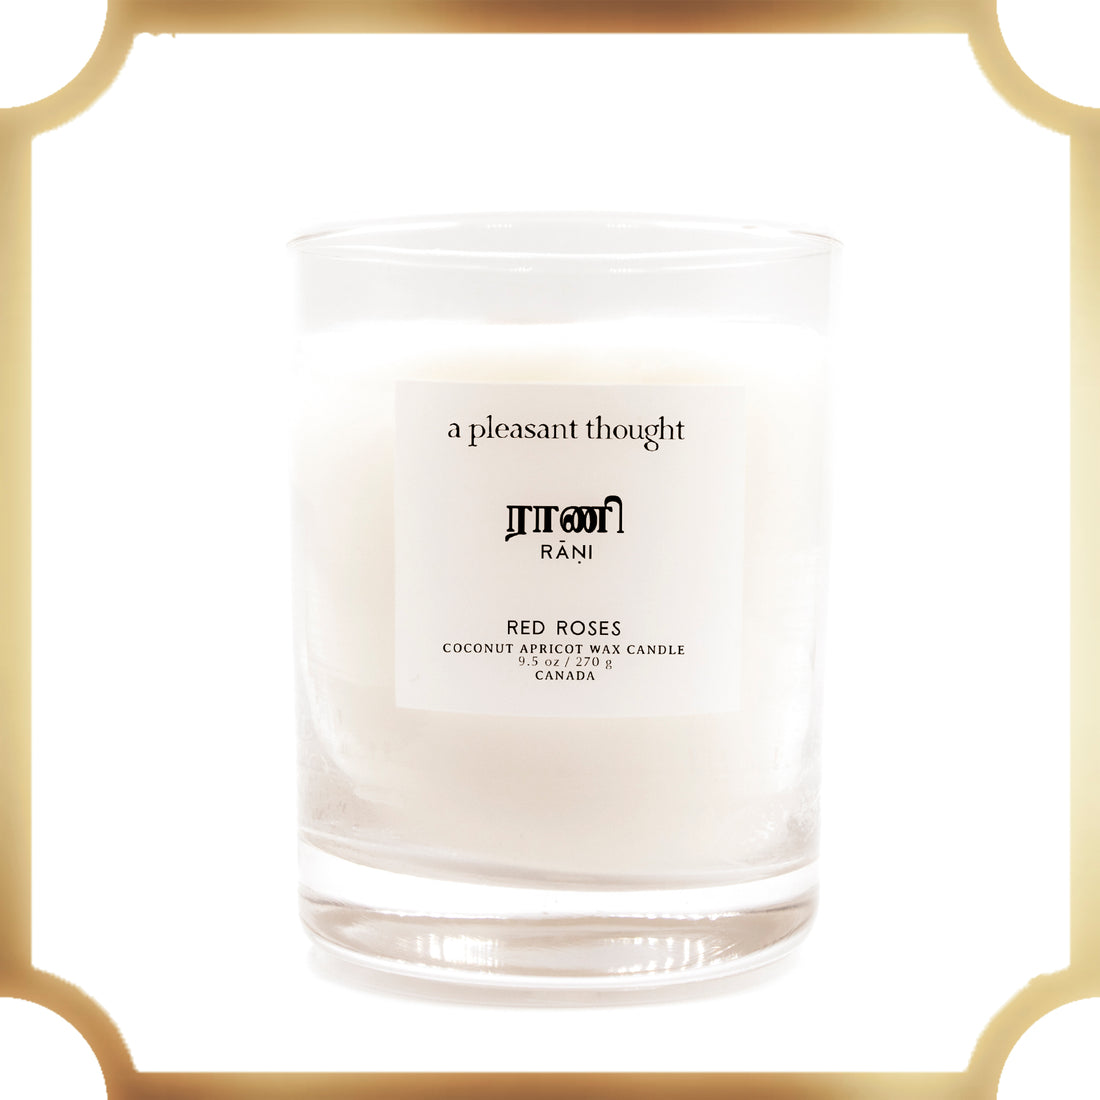  uyir classic candle collection